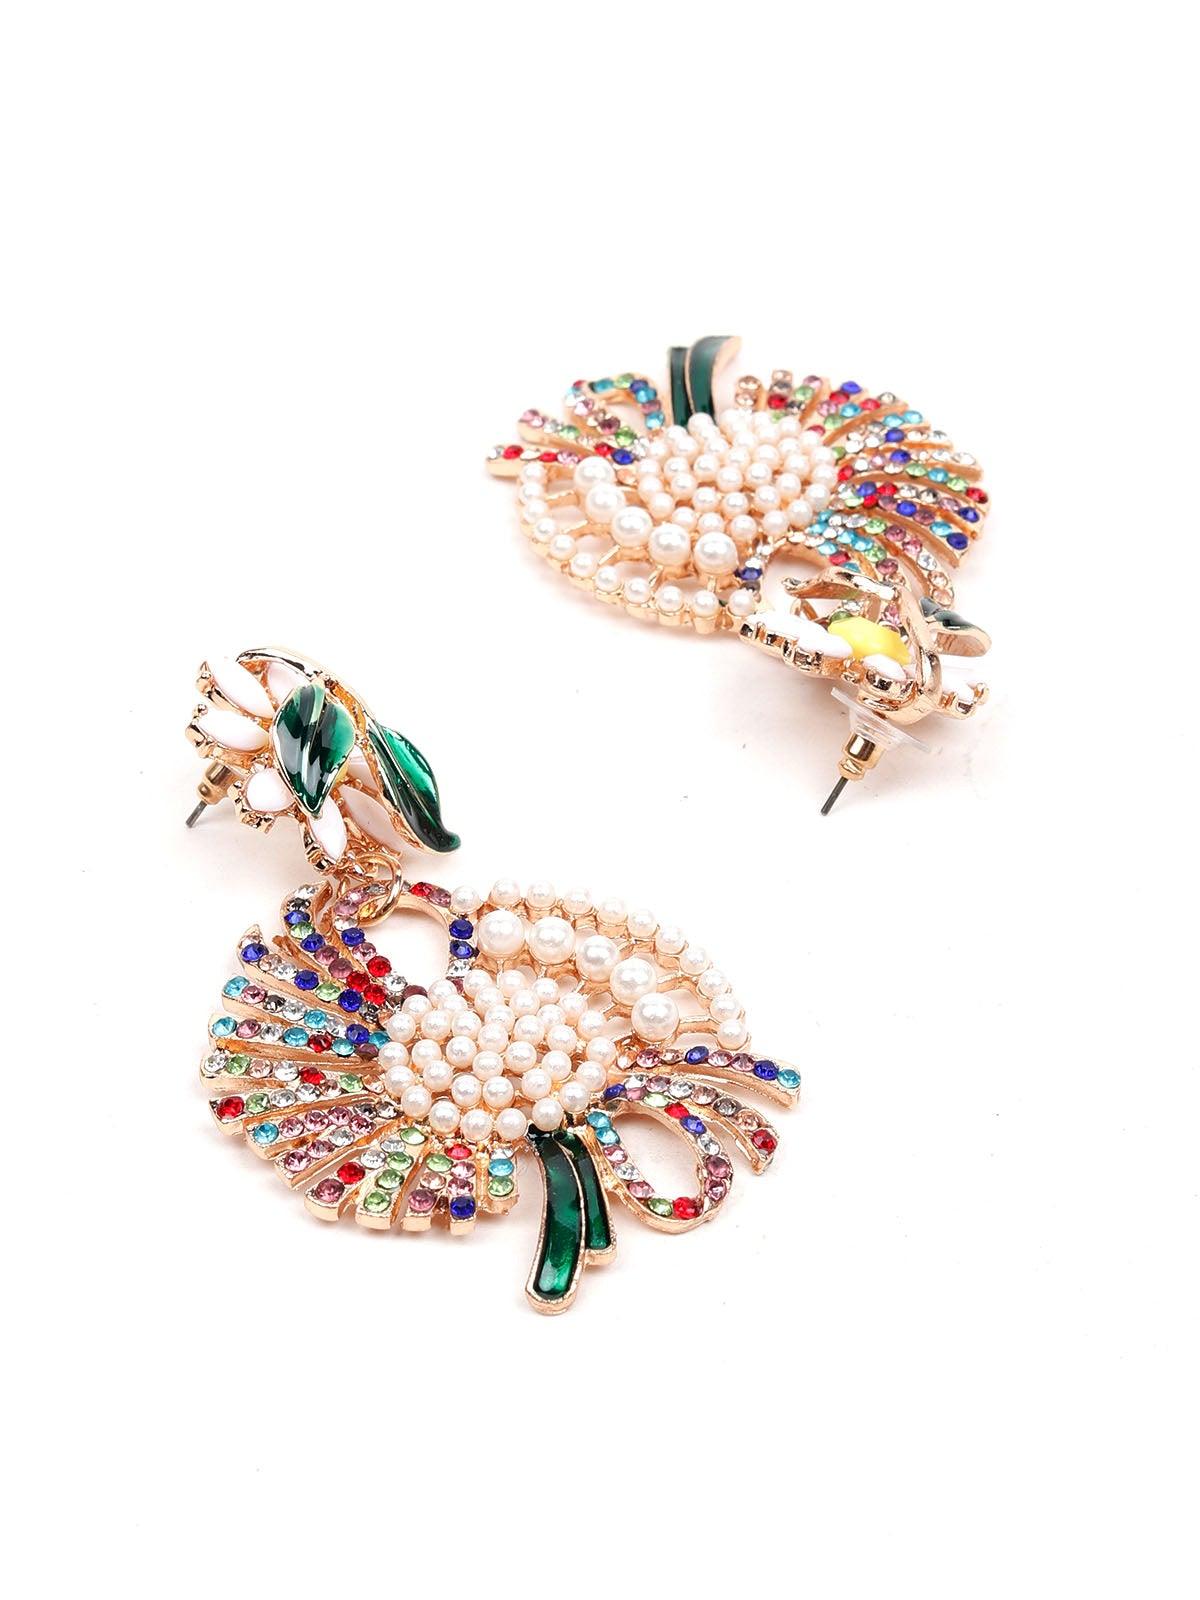 Women's Exquisite Peacock Feathers Inspired Earrings - Odette